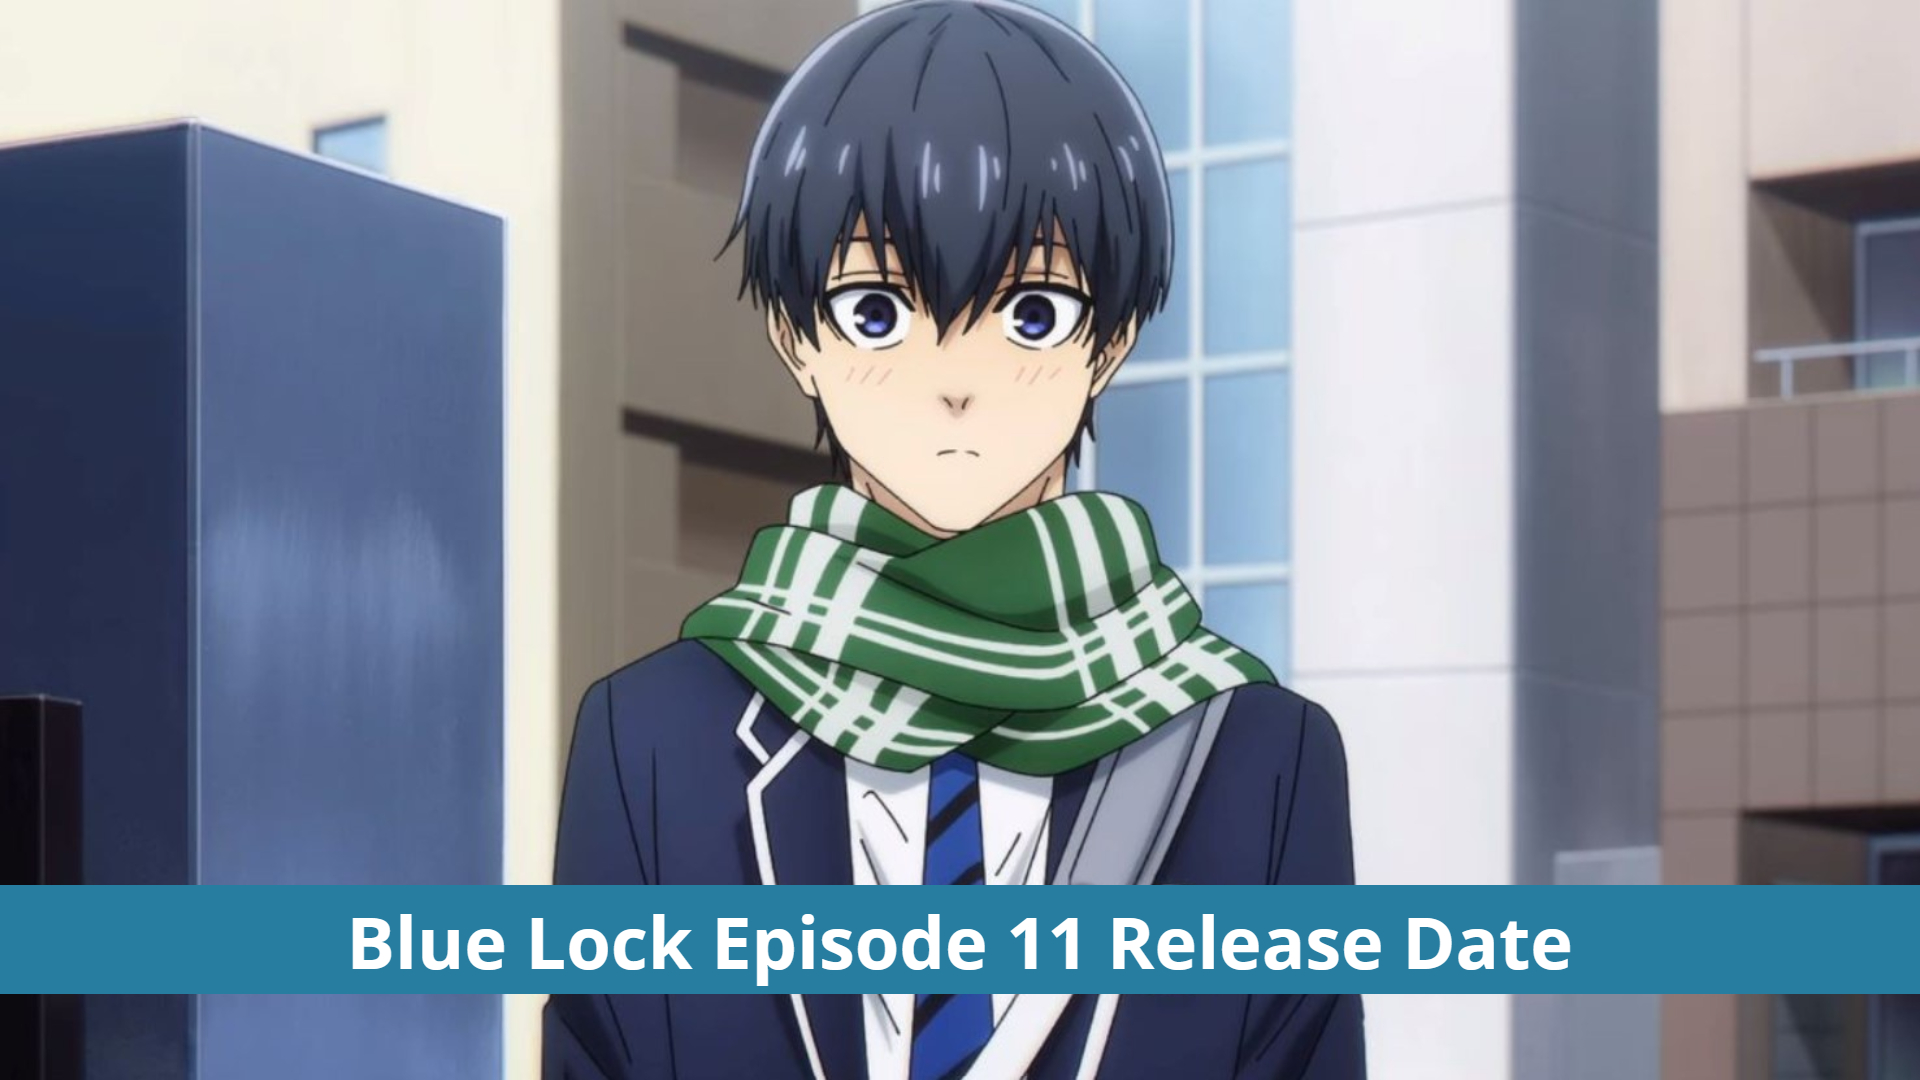 Blue Lock Episode 11: Can Isagi Take The Last Goal? Release Date